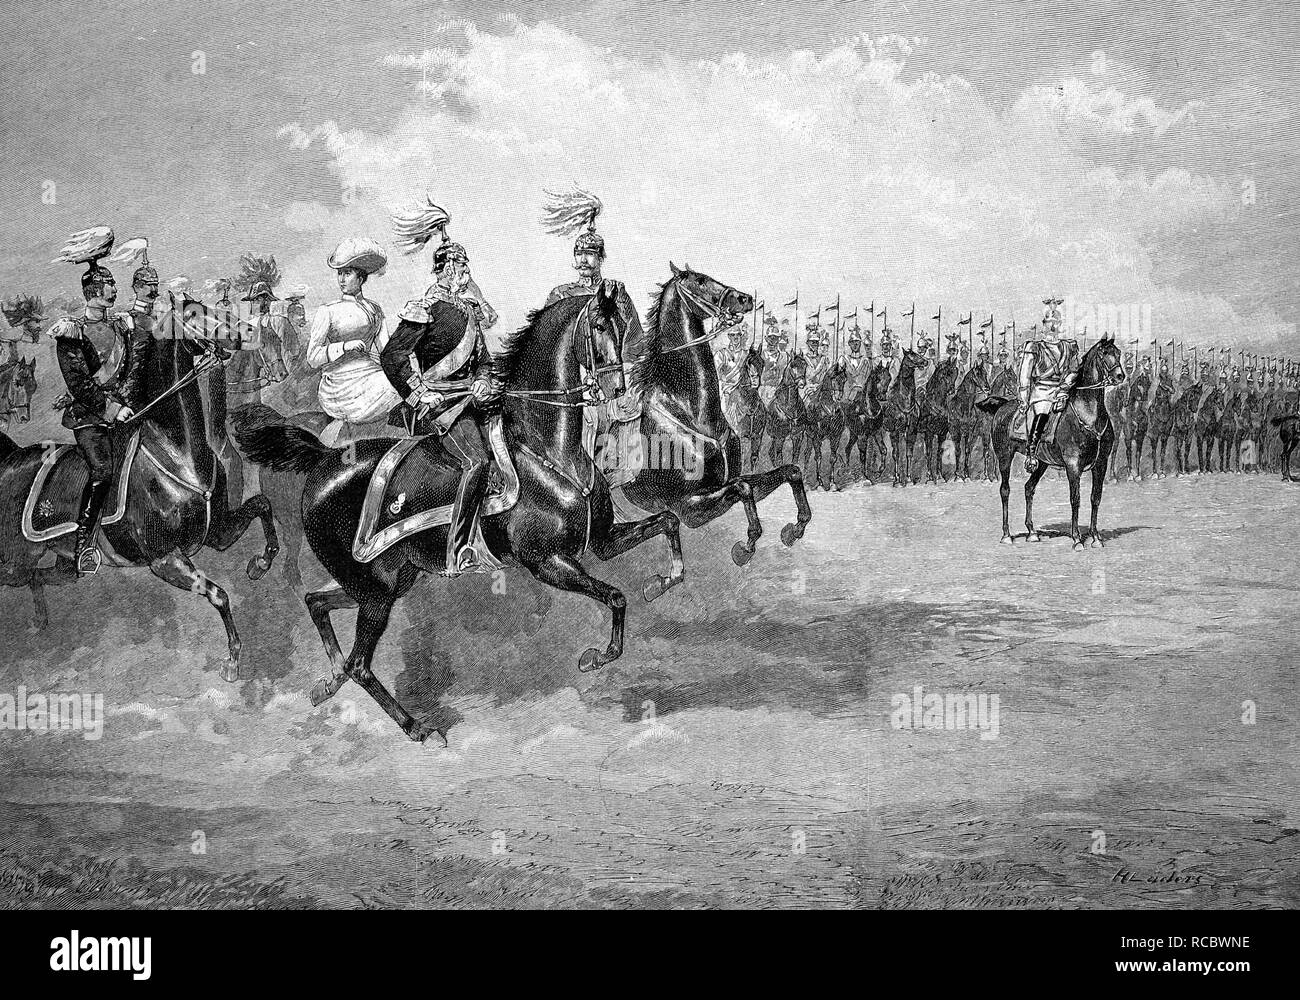 The parade in honor of Emperor Franz Joseph on Tempelhofer Feld field in Berlin, historical engraving, about 1888 Stock Photo